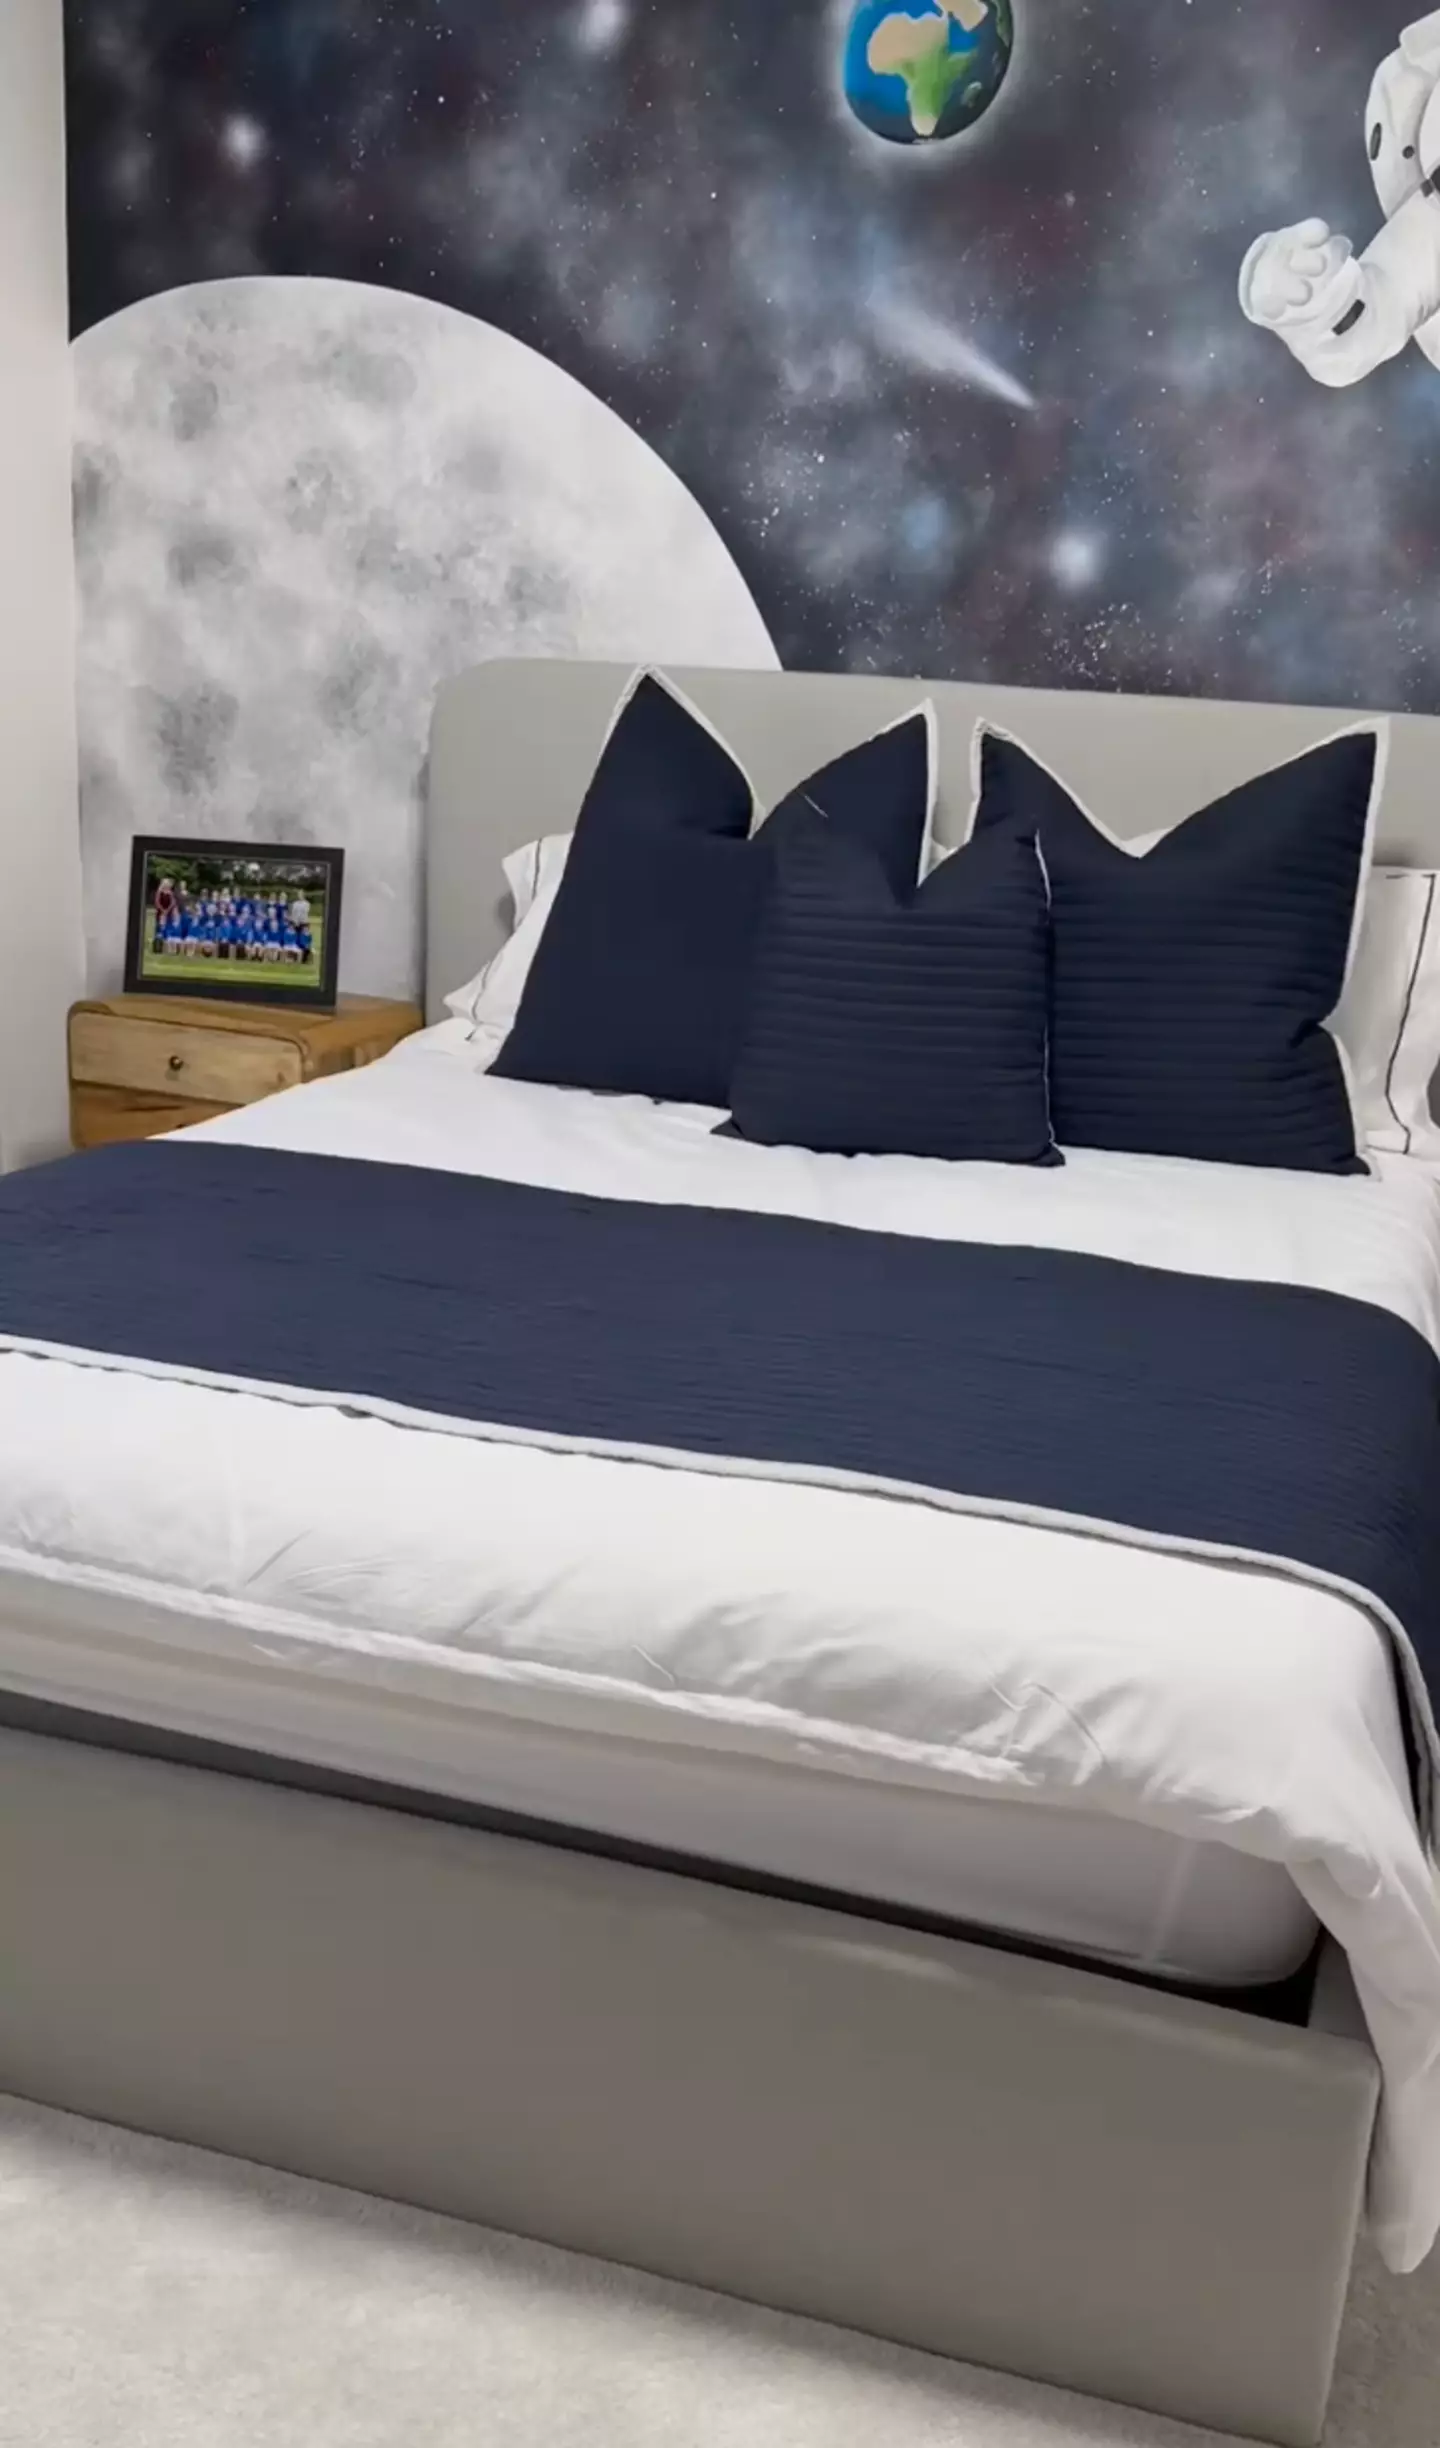 Chester's room is navy blue and space-themed.